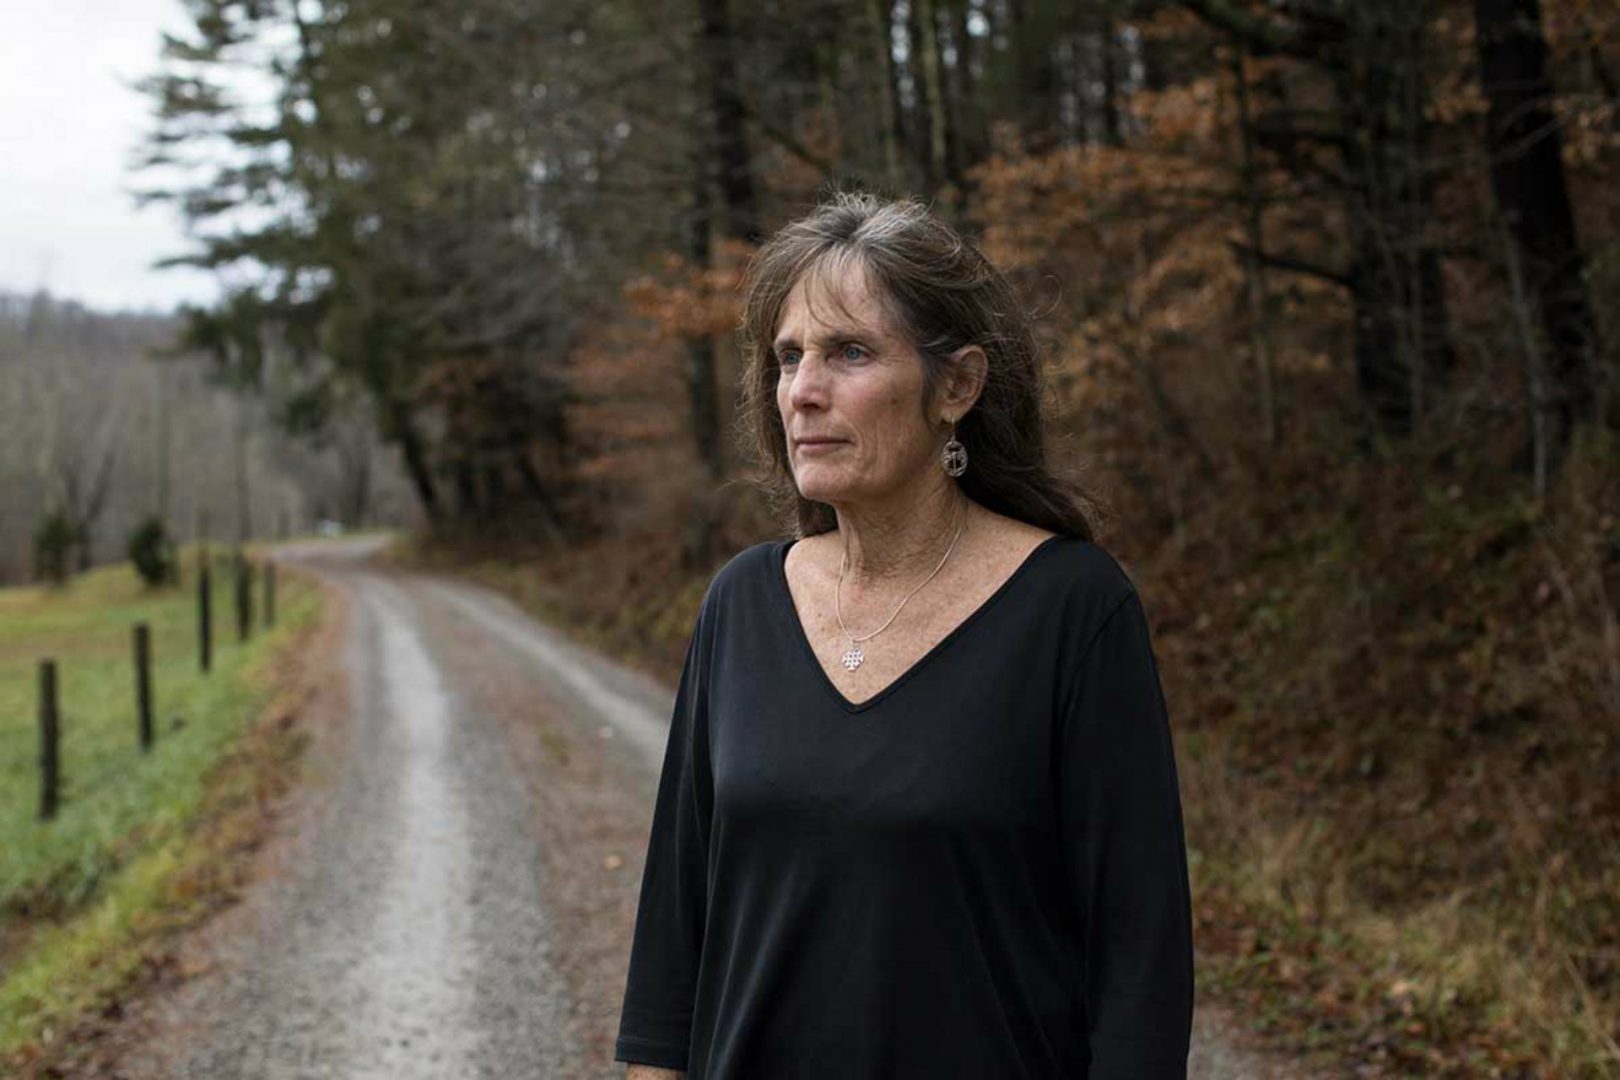 Mary Milkowski, who lives in Harrison County, West Virginia, said the dust from passing trucks was so bad her family stopped using their porch. 